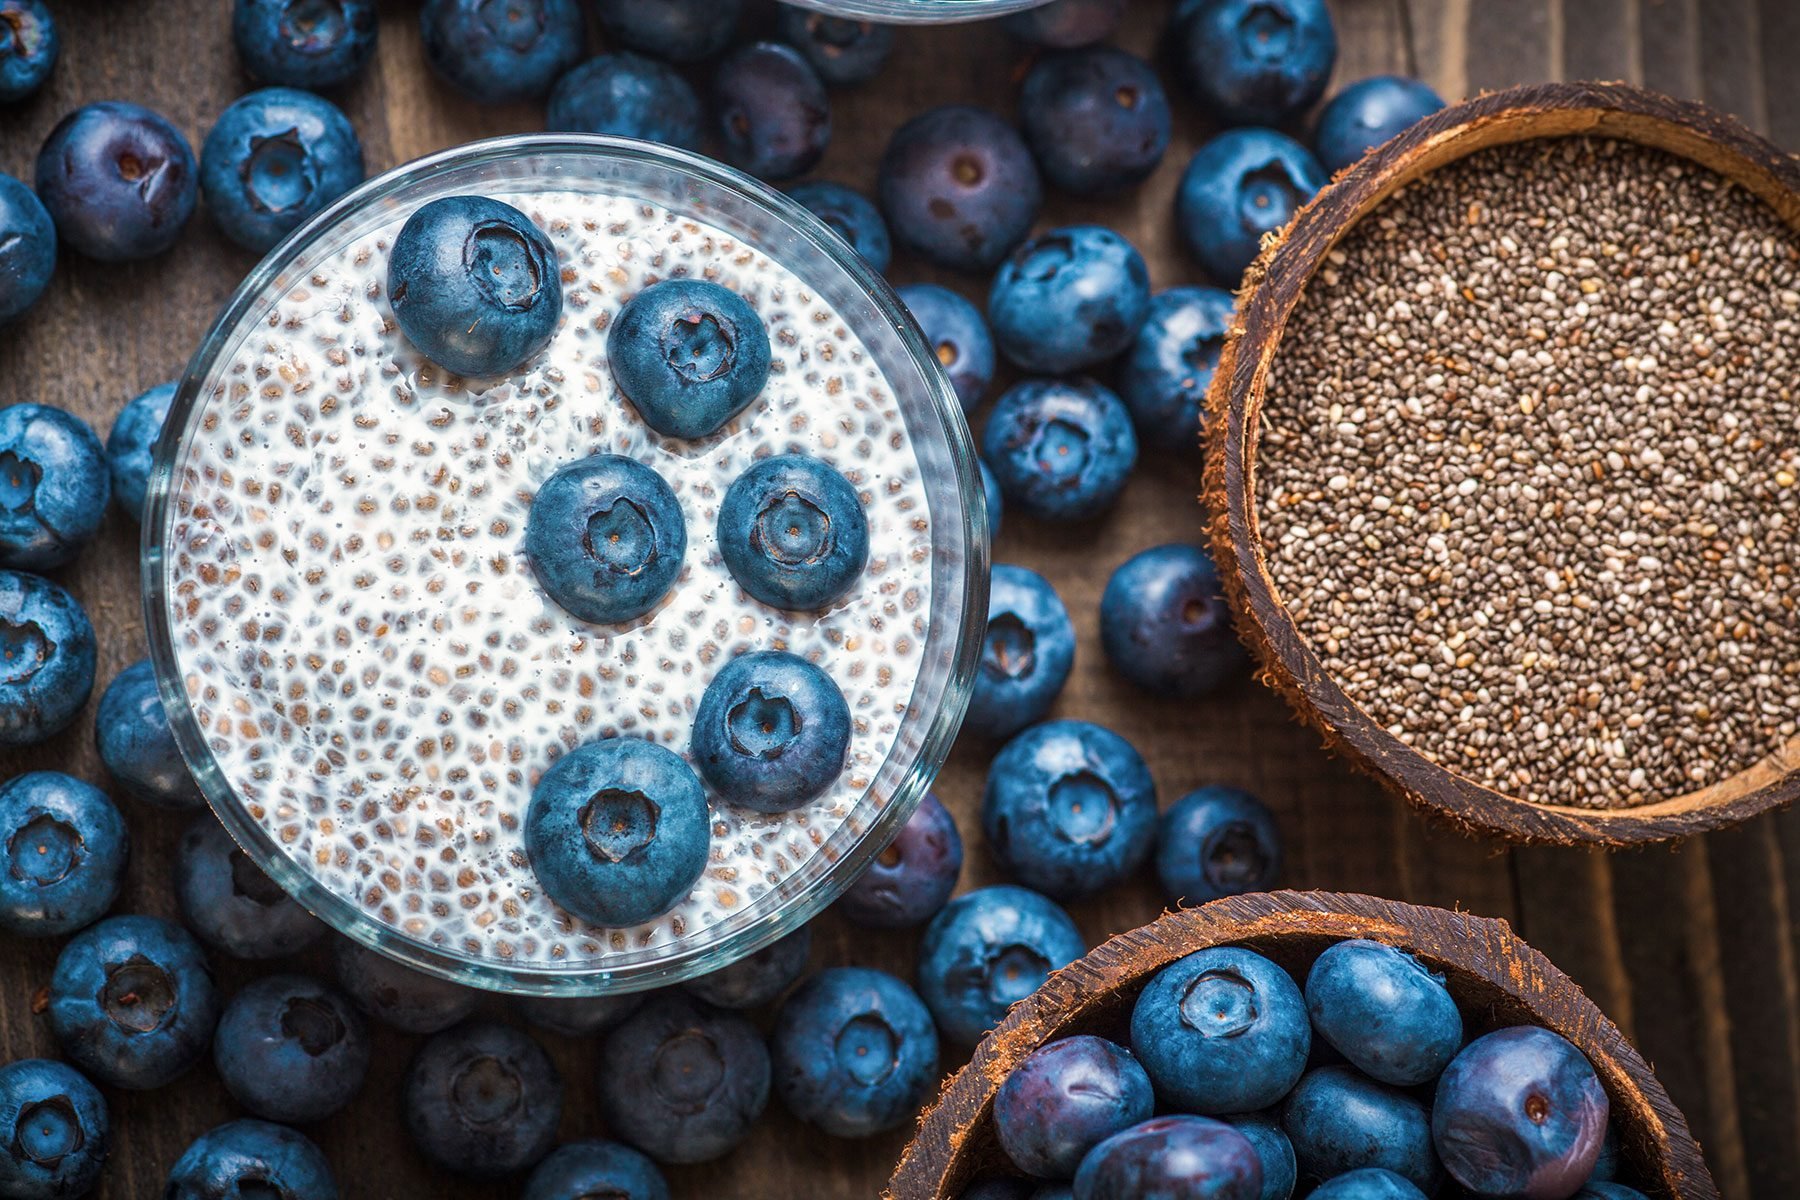 New Report: These Top 5 'Superfoods' Are Causing Unexpected Side Effects